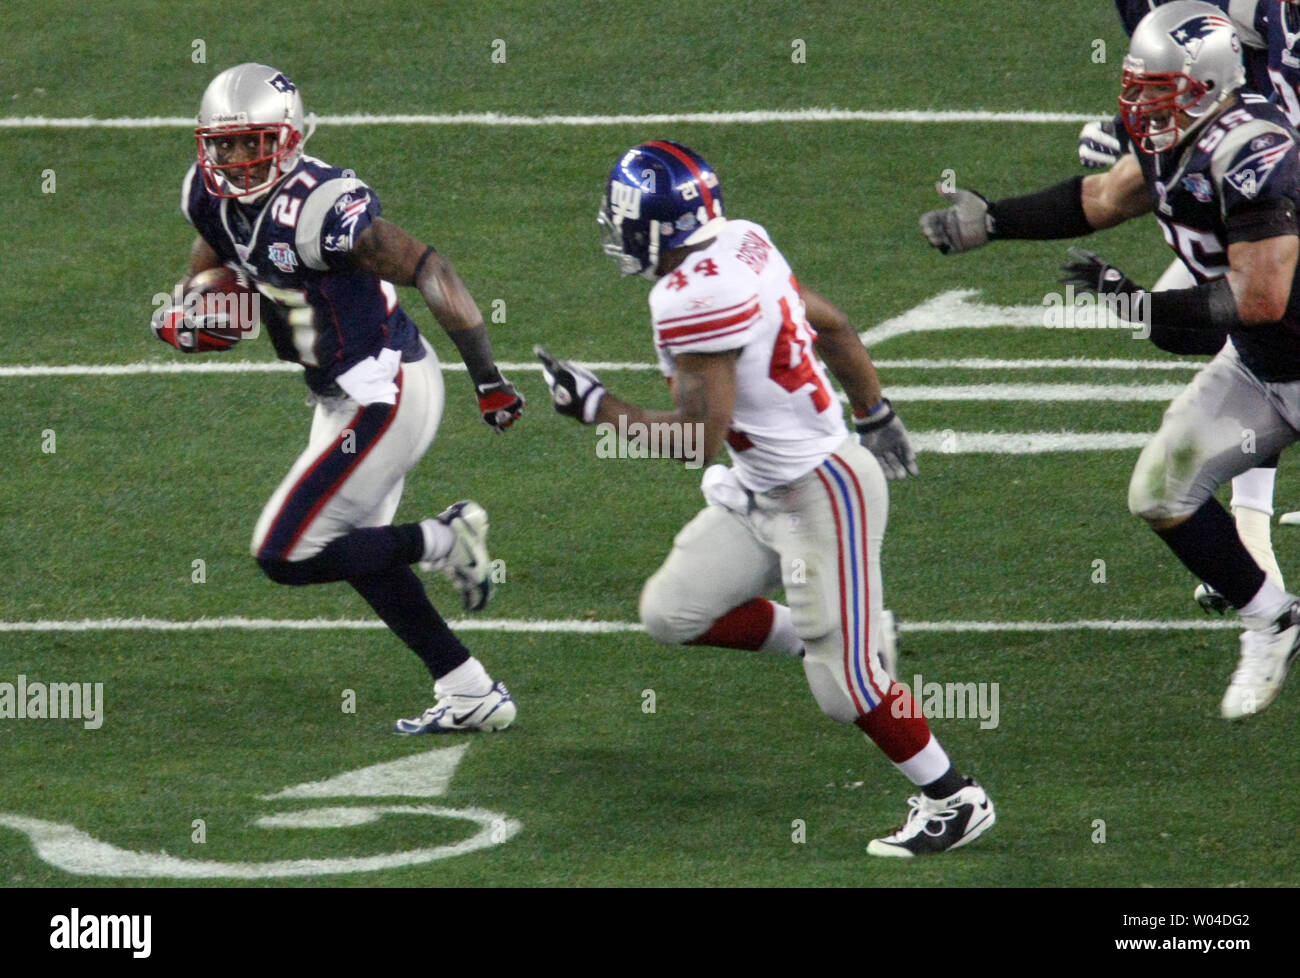 New England Patriots cornerback Ellis Hobbs III (L) runs the ball after he intercepted a pass intended for New York Giants wide receiver Steve Smith in the second quarter during Super Bowl XLII at University of Phoenix Stadium in Glendale, Arizona on February 3, 2008. (UPI Photo/Jon SooHoo) Stock Photo